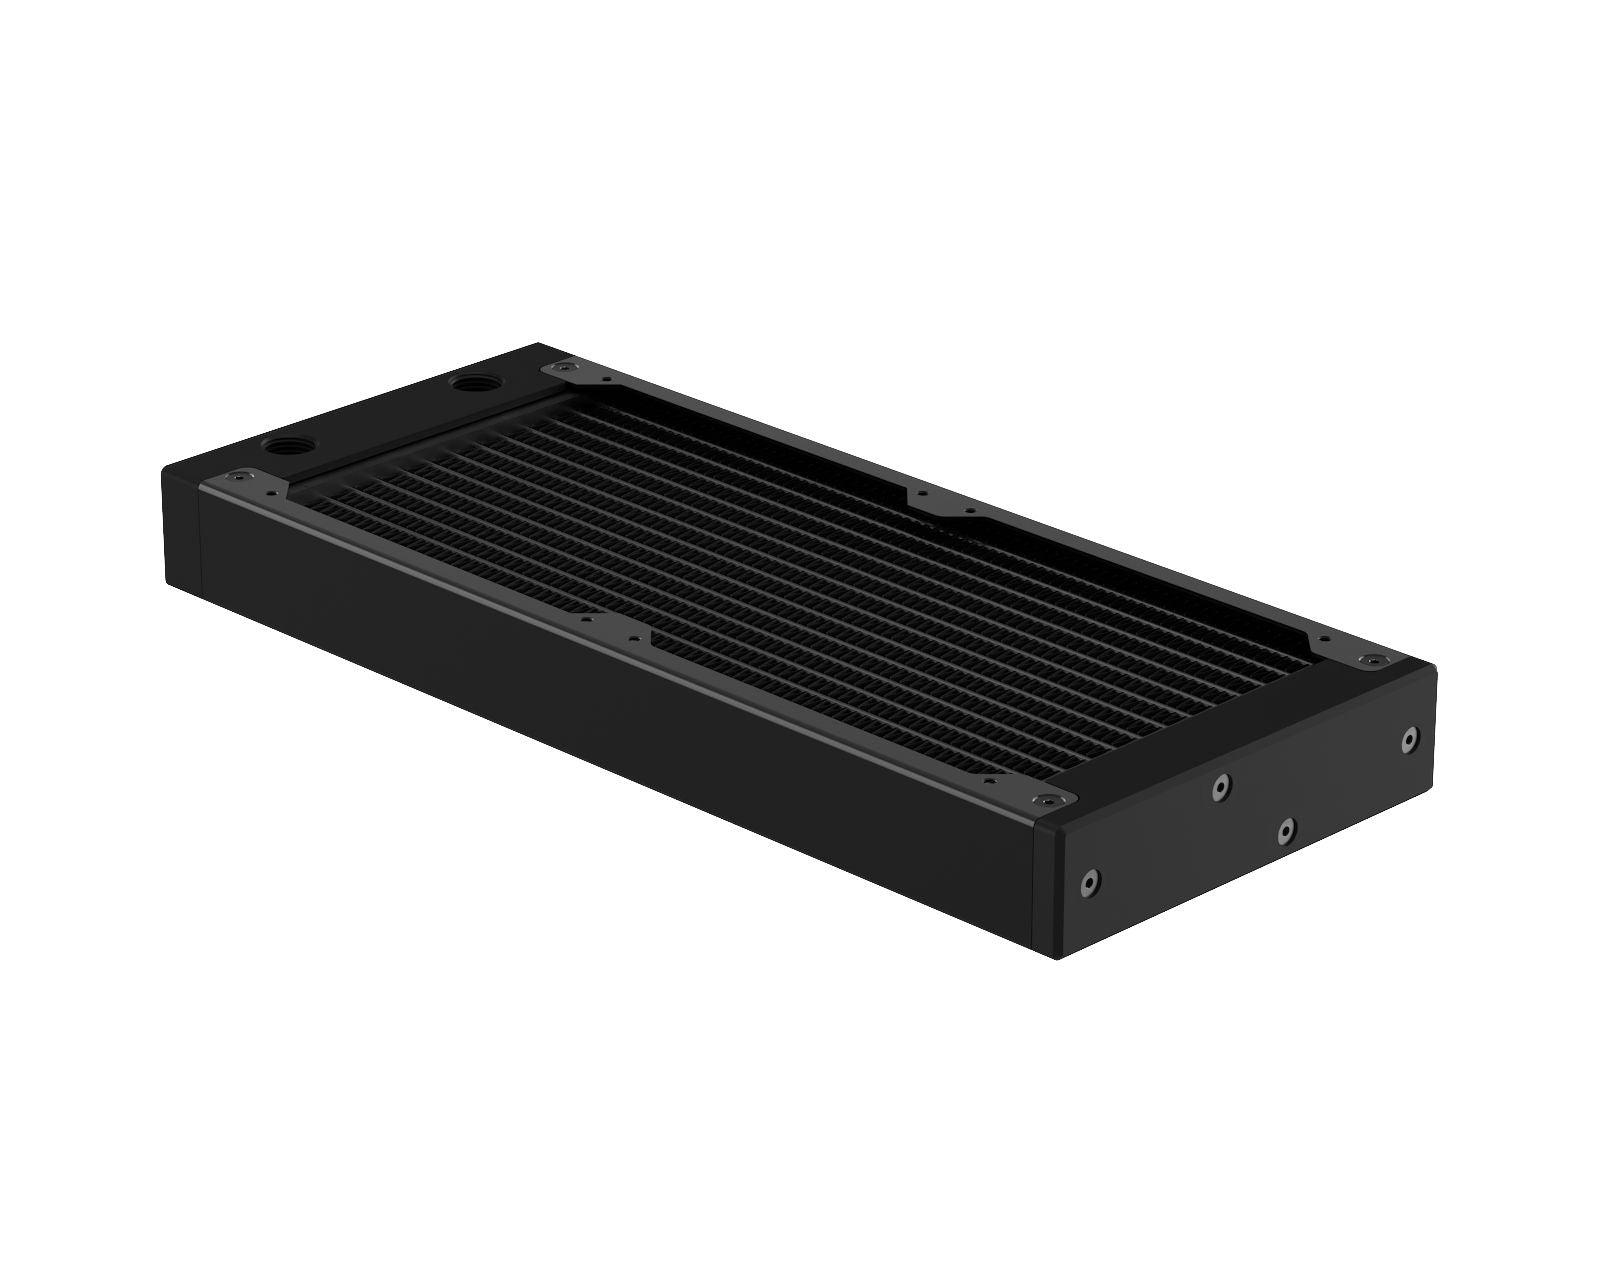 PrimoChill 240SL (30mm) EXIMO Modular Radiator, Black POM, 2x120mm, Dual Fan (R-SL-BK24) Available in 20+ Colors, Assembled in USA and Custom Watercooling Loop Ready - Satin Black